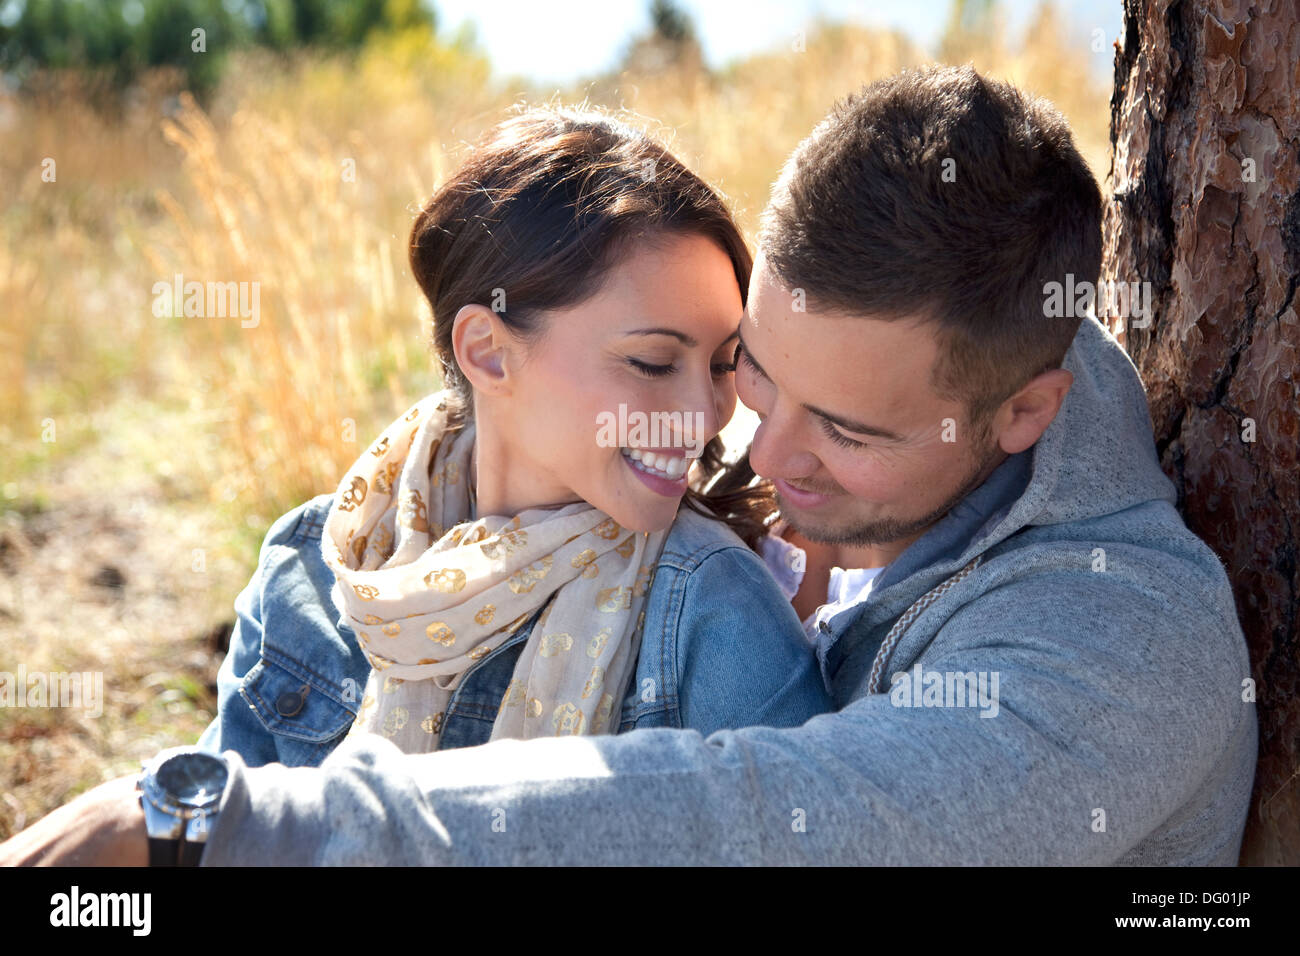 Outdoor close-up photo of young couple seated in grassy field. Stock Photo